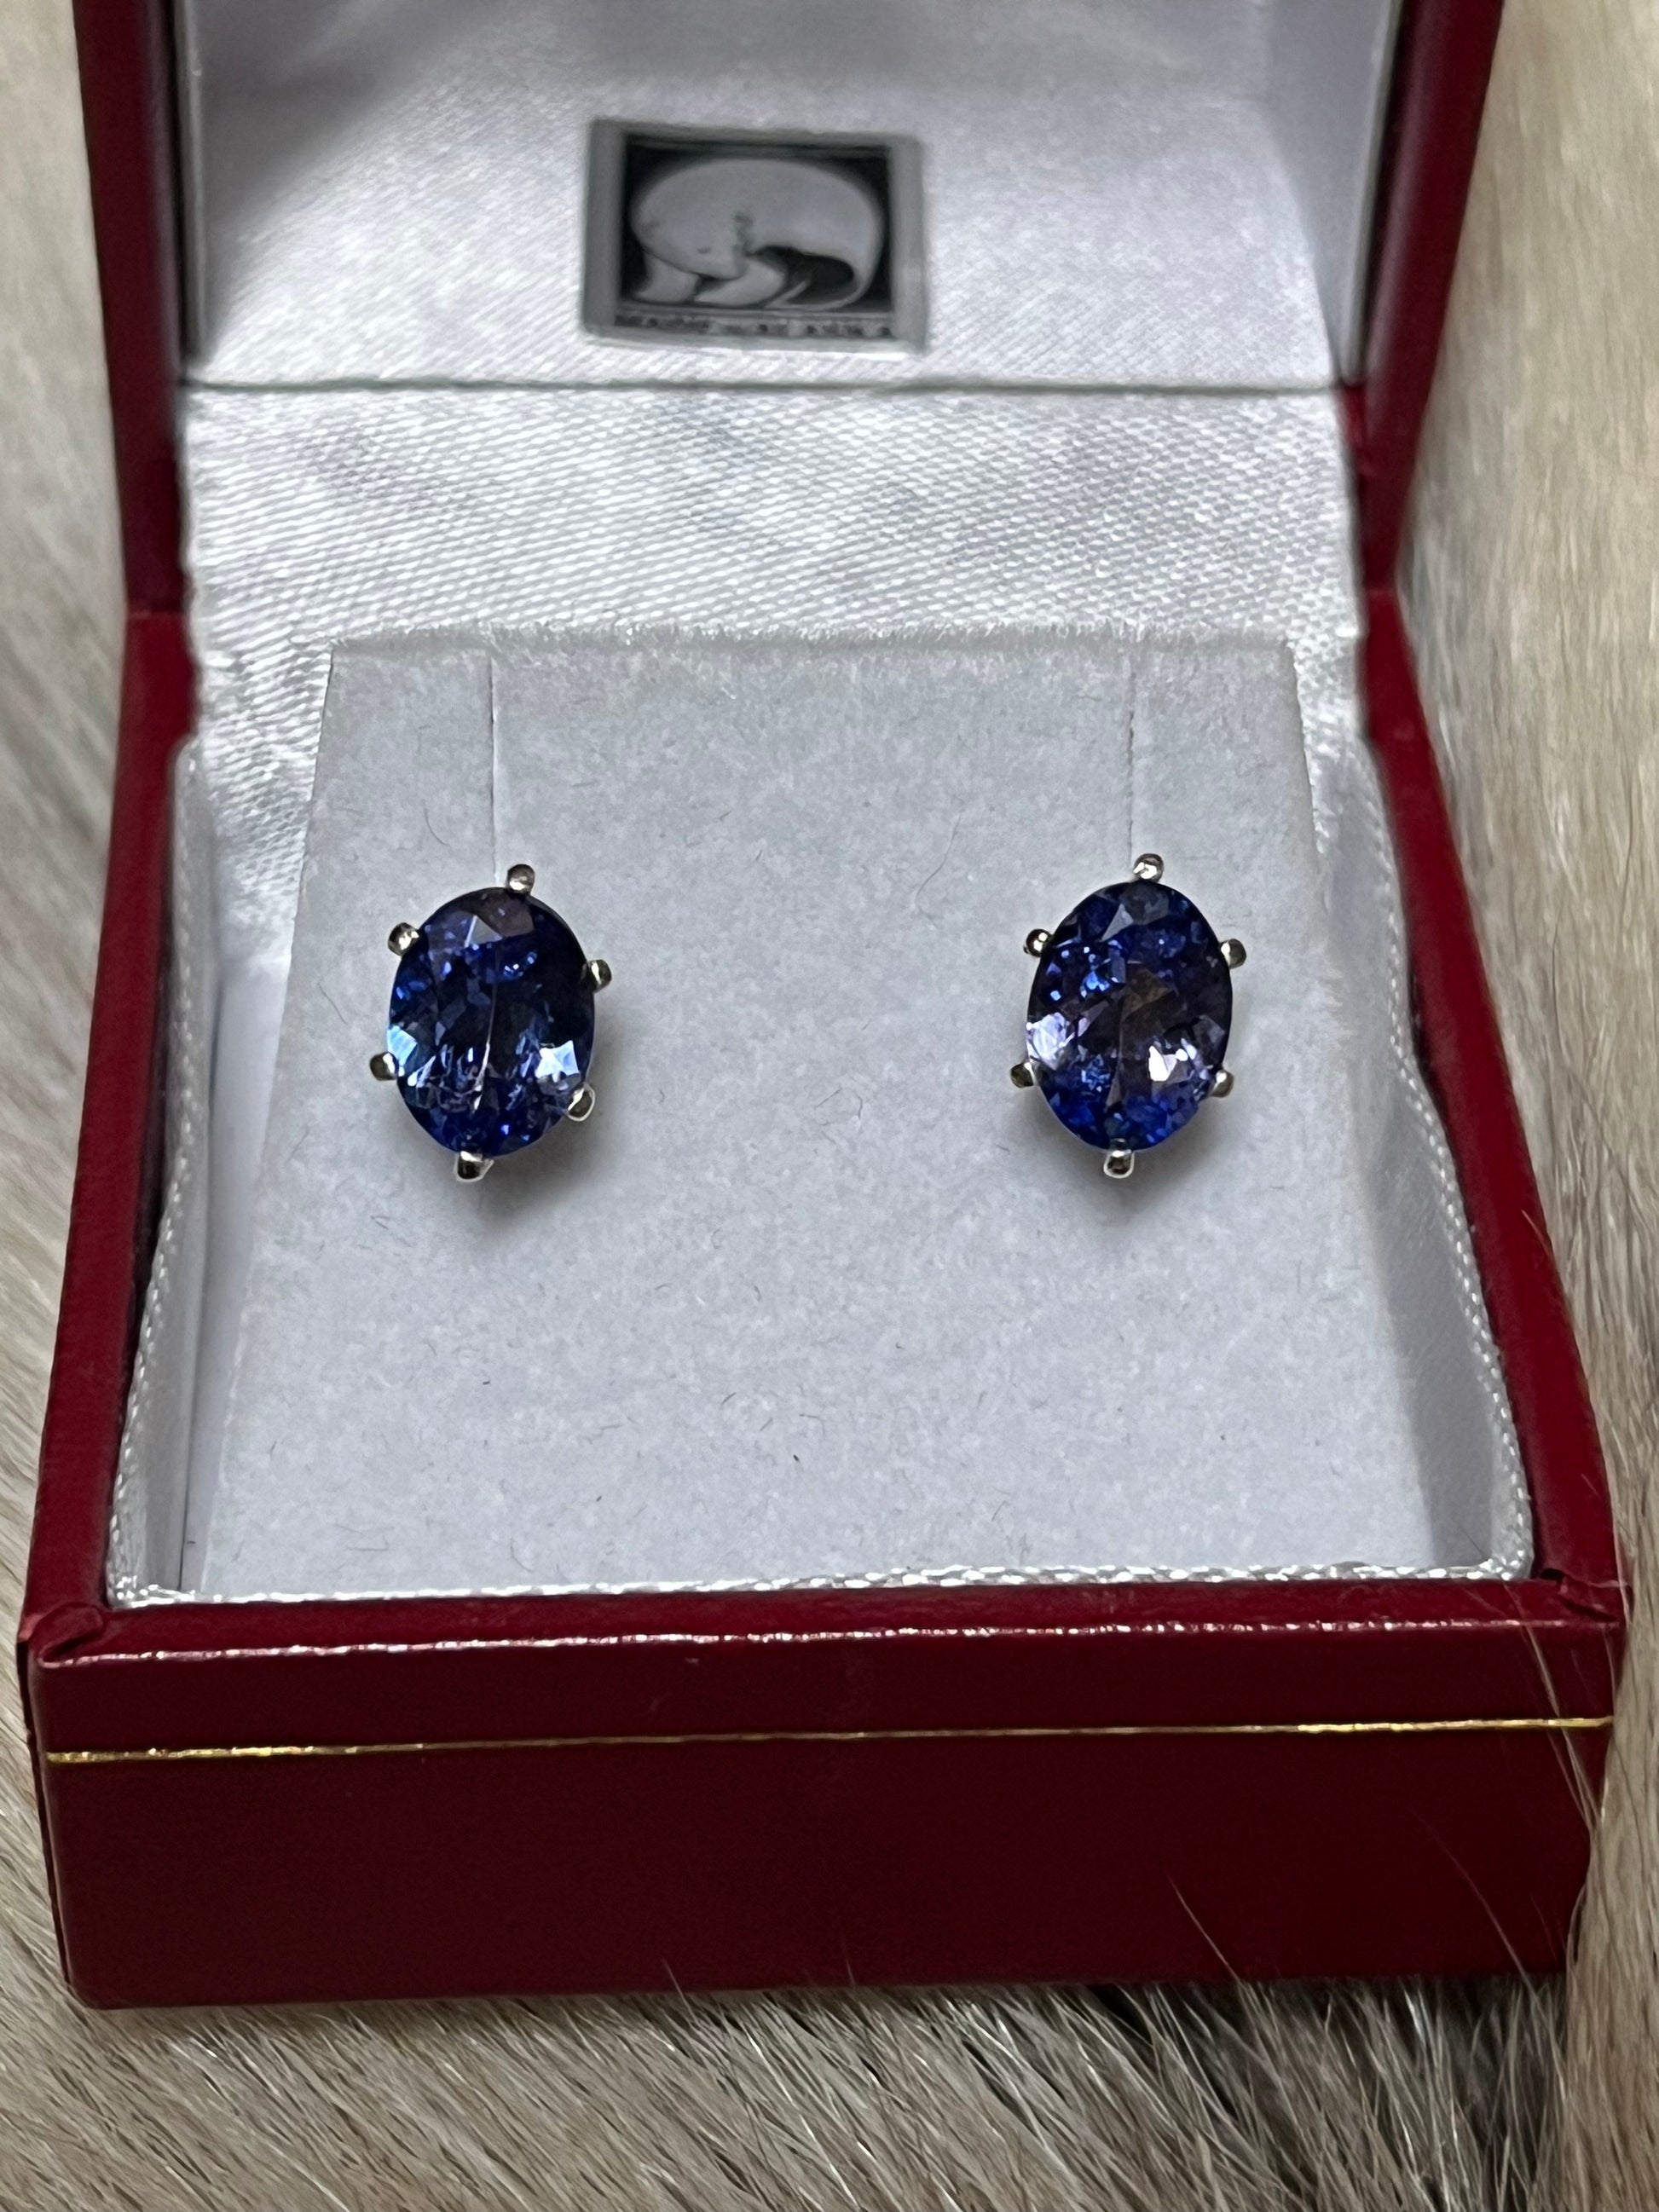 Tanzanite earrings in sterling silver 1.11 & 1.17ct. Authentic native handcraft from Alaska.